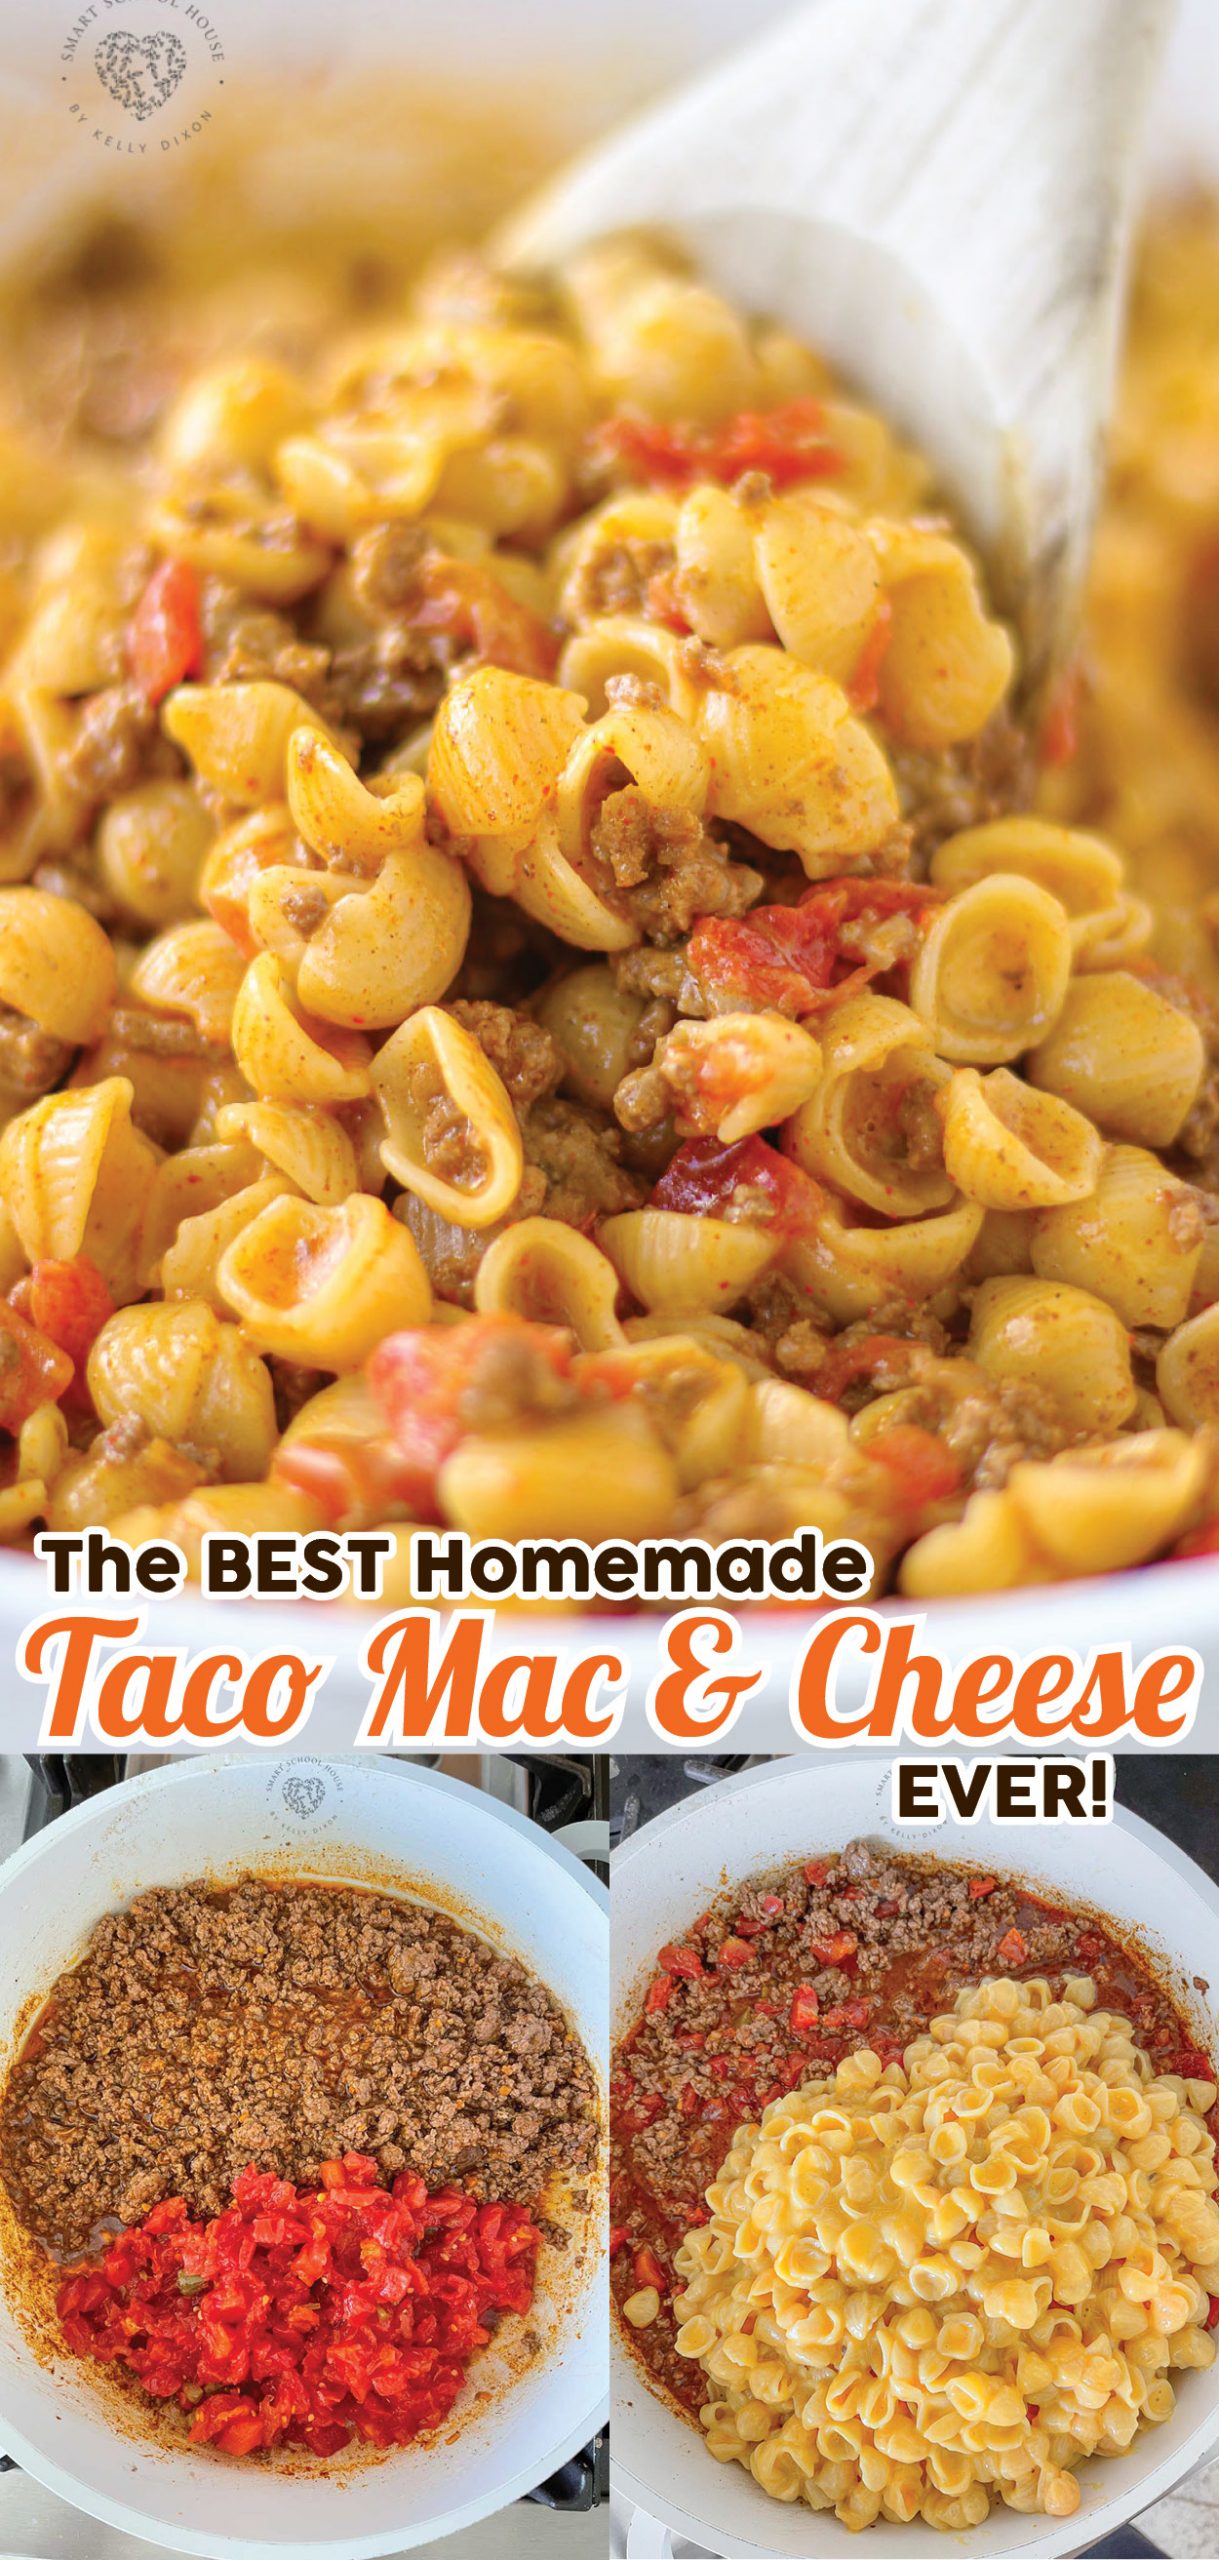 Taco Macaroni and Cheese is the perfect easy weeknight meal you need to add to your meal planning menu! It's a blend of ground beef, macaroni and cheese, and taco seasoning all rolled into one fantastic dish.